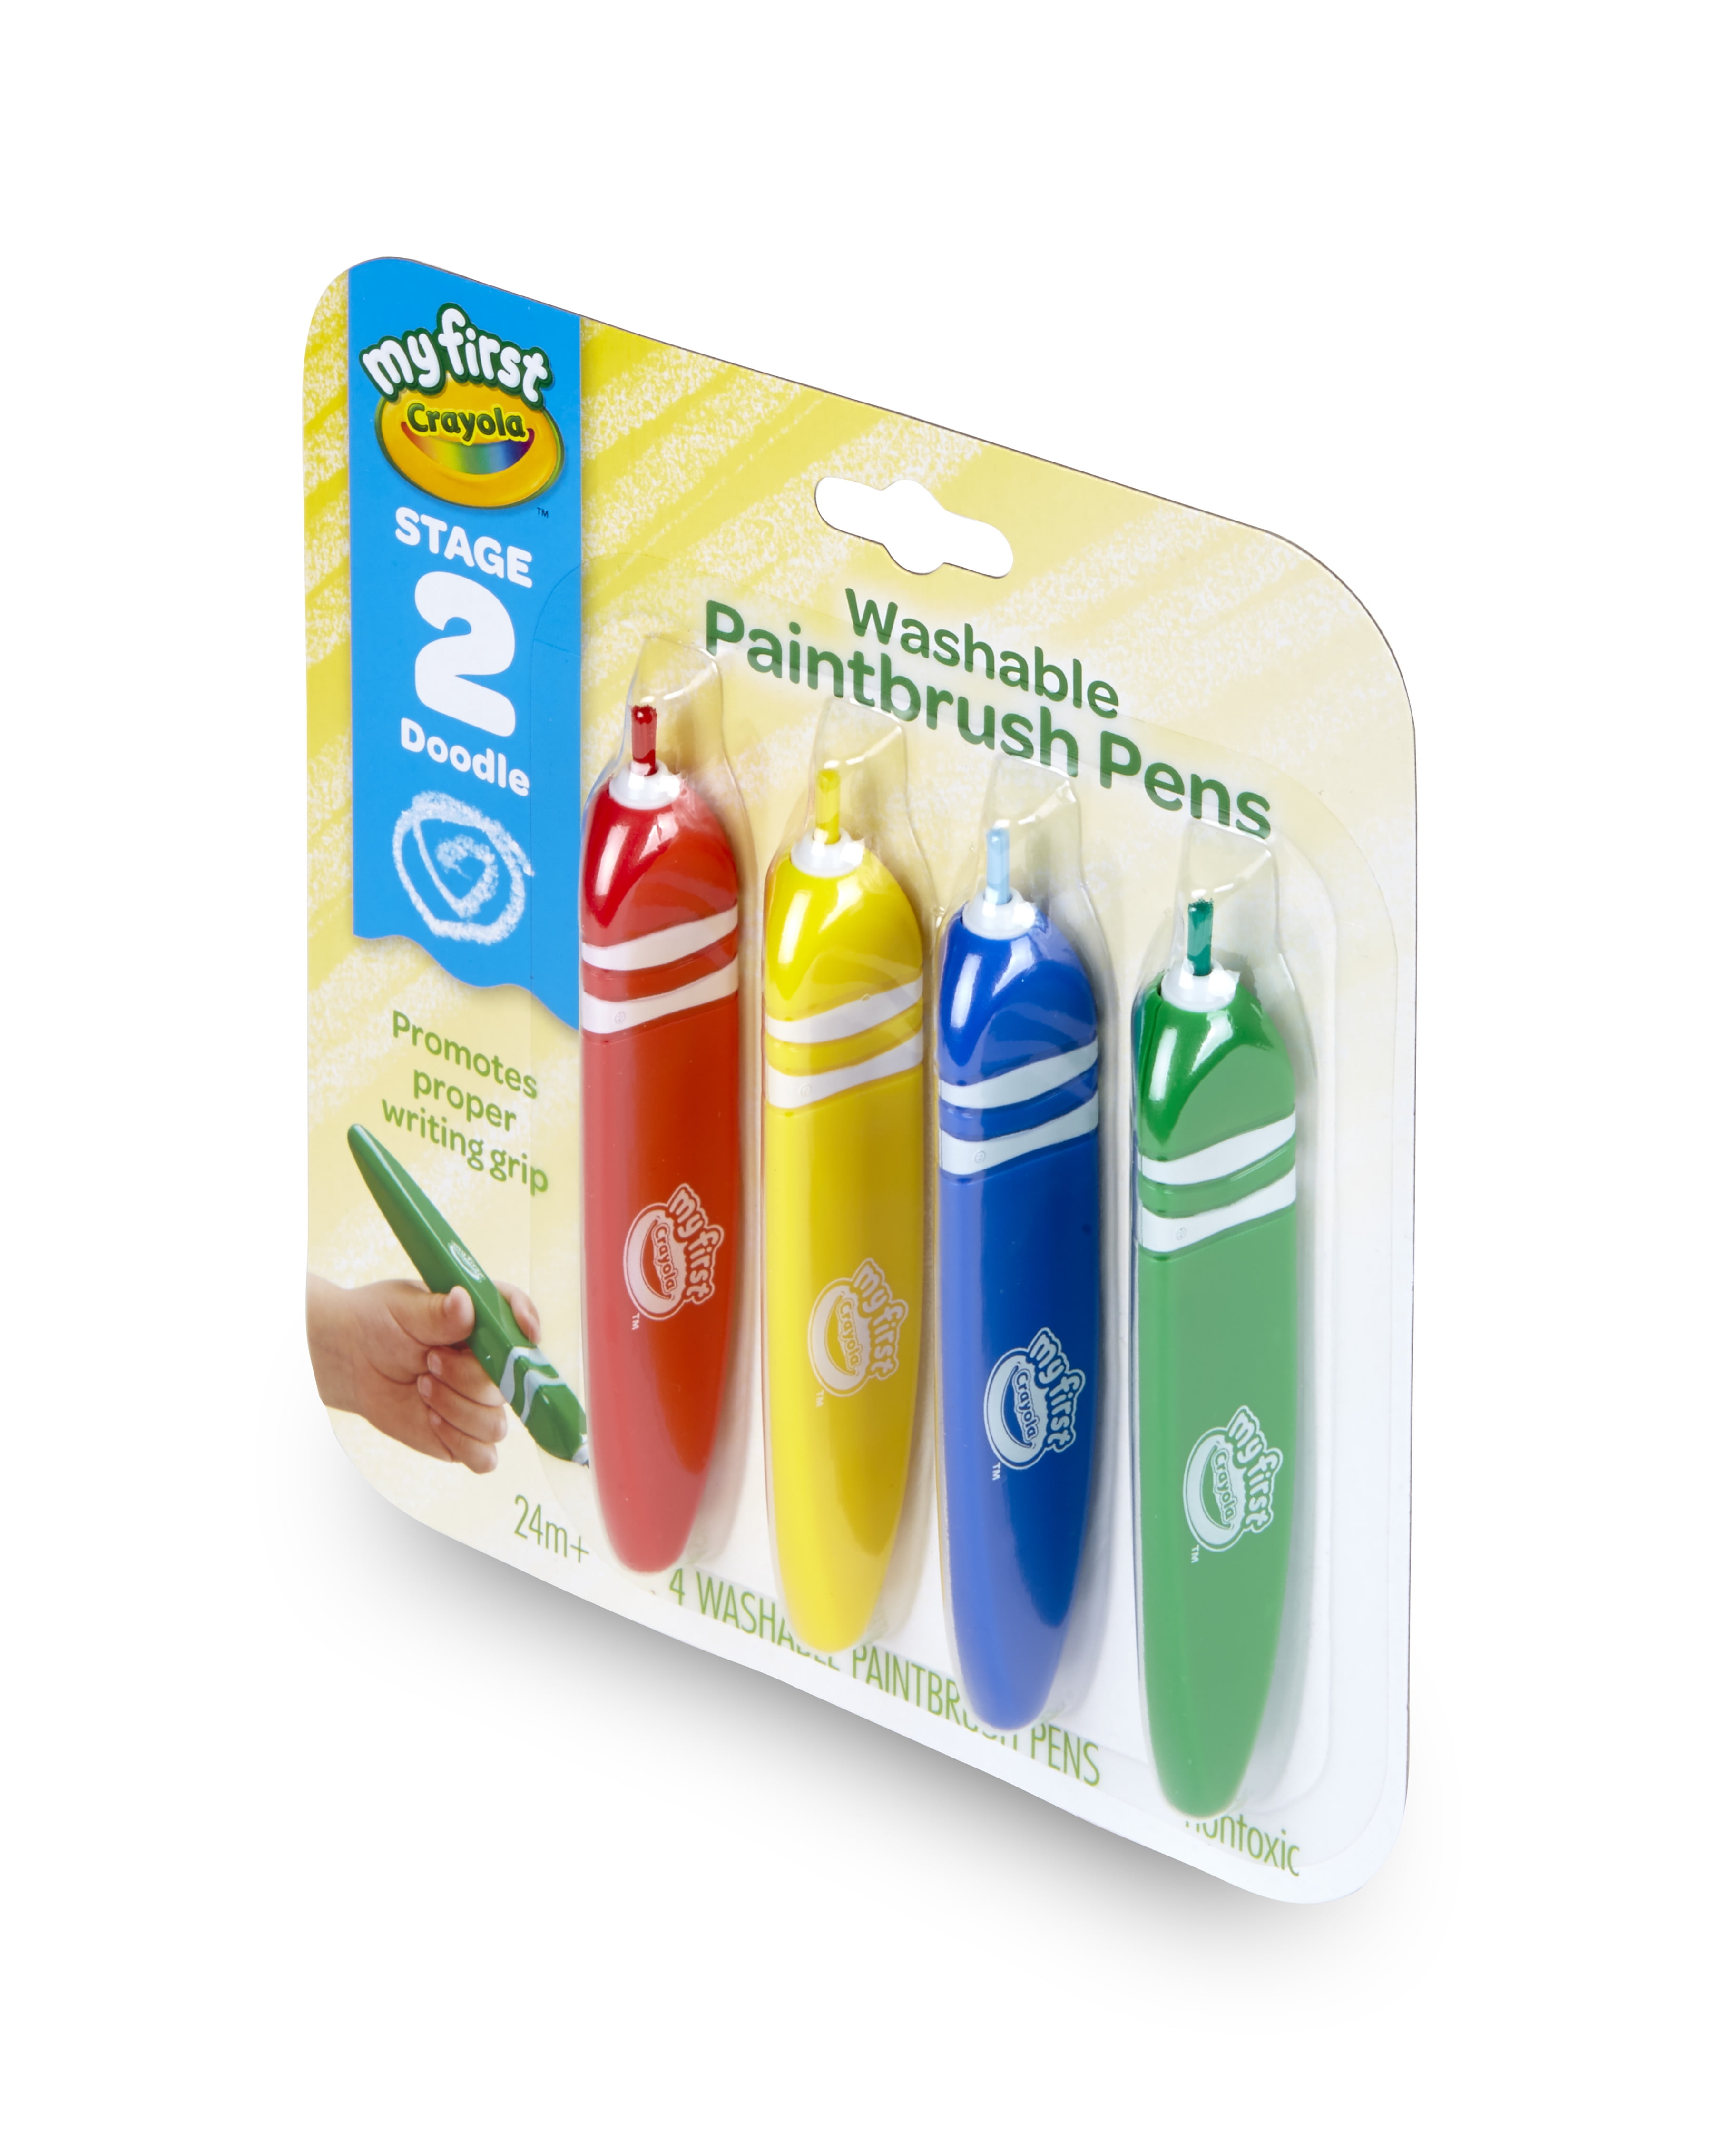 Crayola Paint Brush Pens - A2Z Science & Learning Toy Store